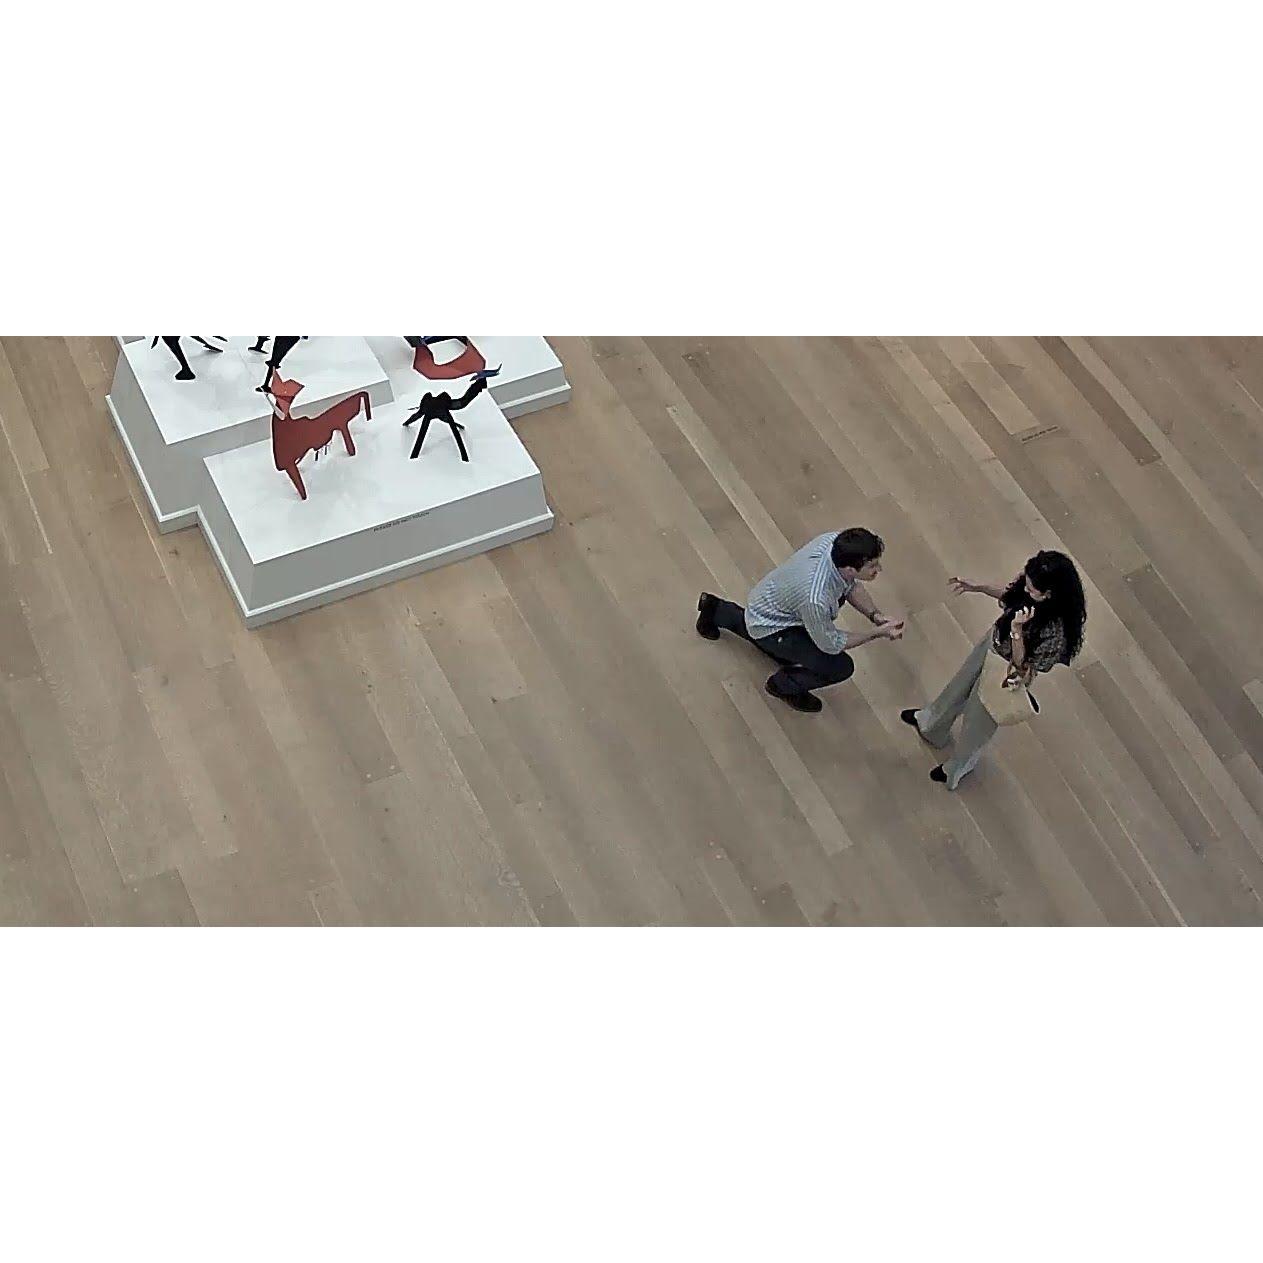 National Gallery of Art, Washington, DC (security cam footage 😅)